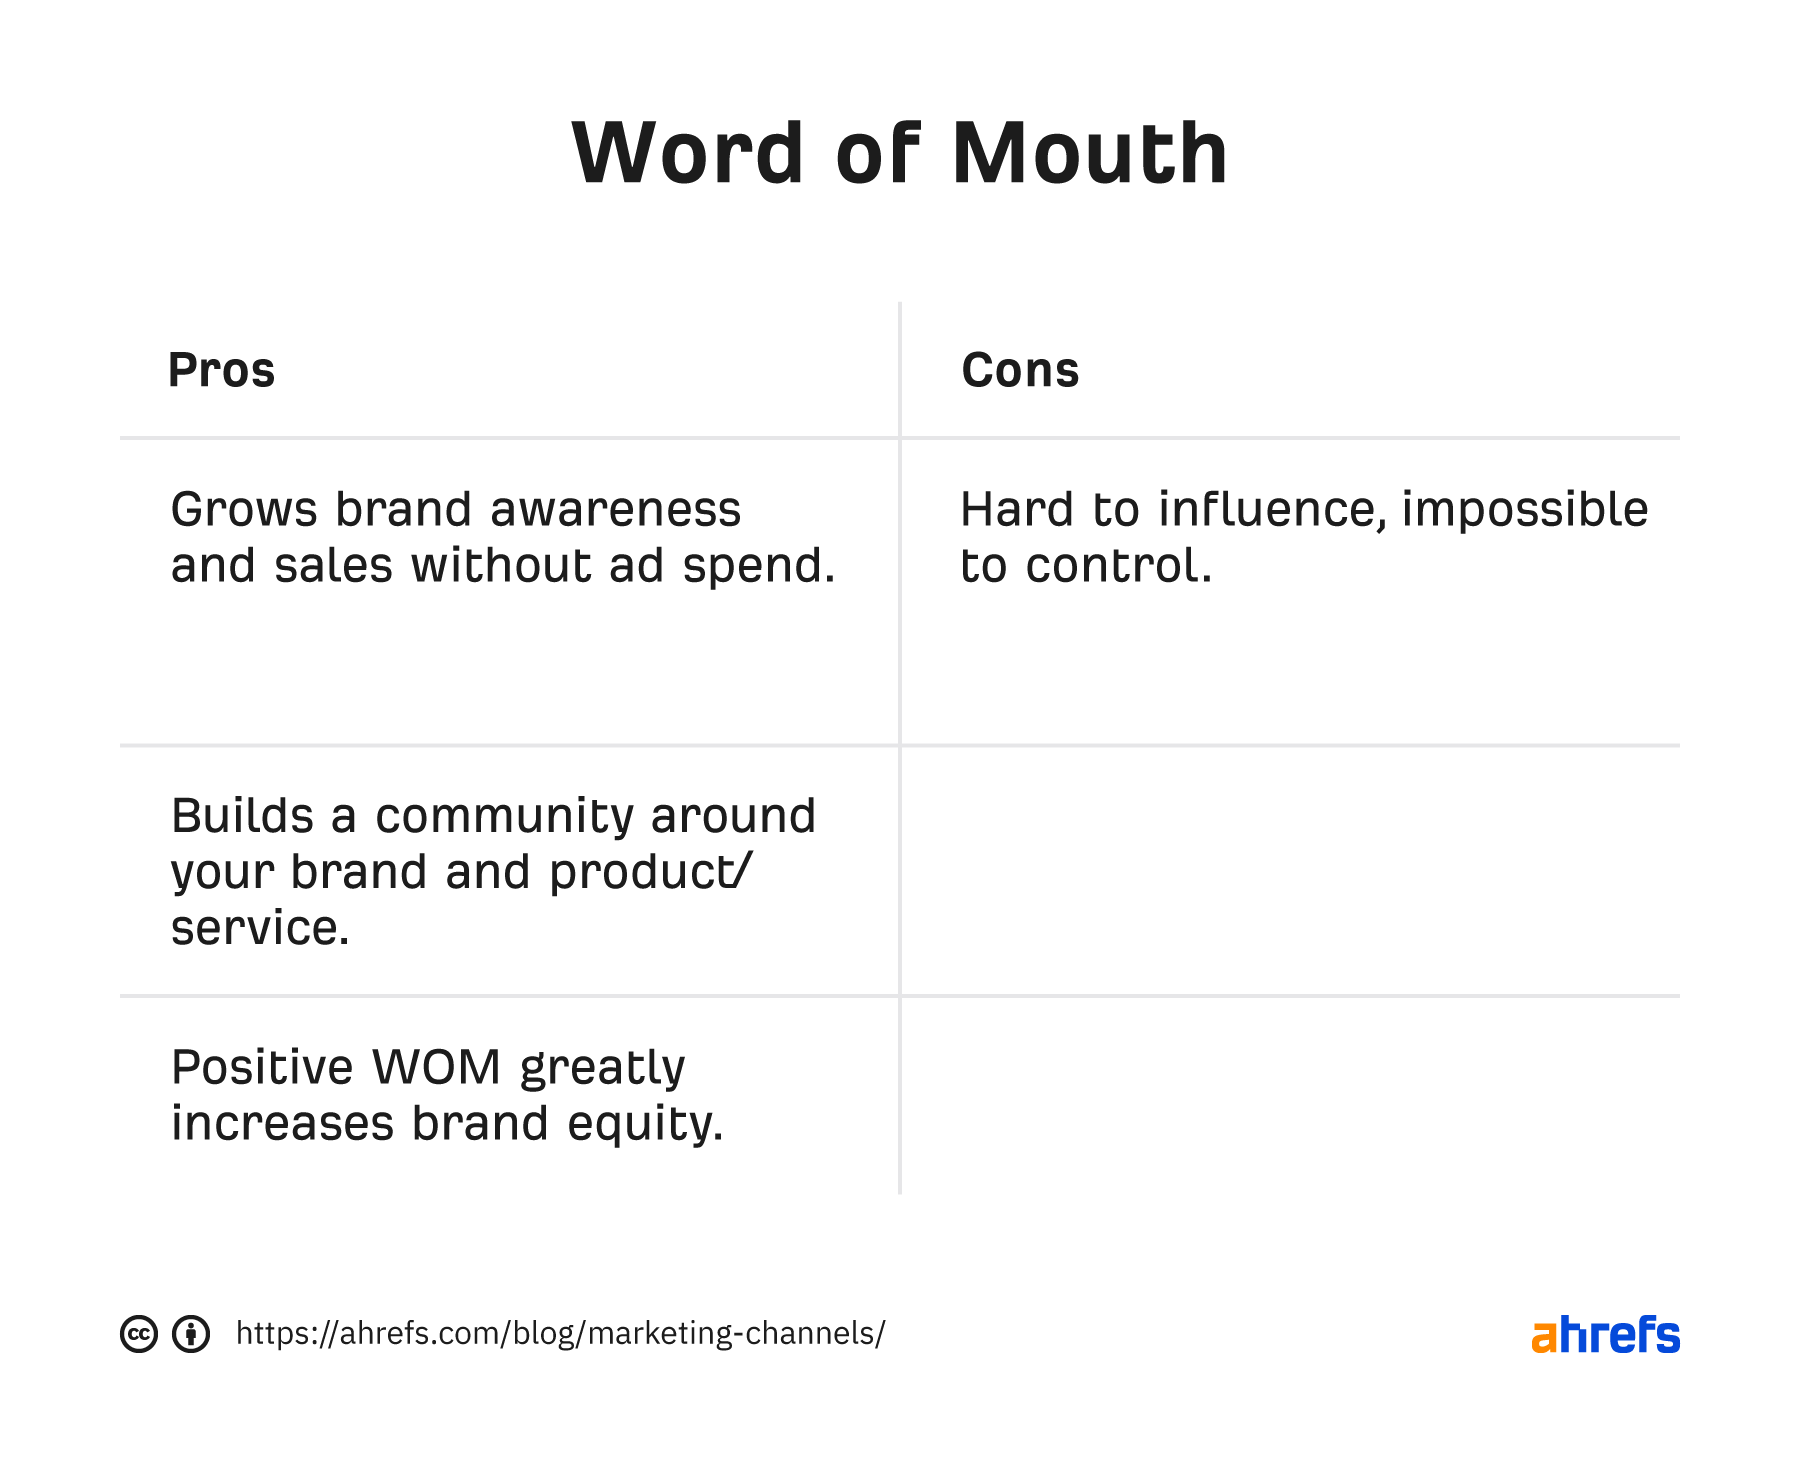 Pros and cons of word of mouth